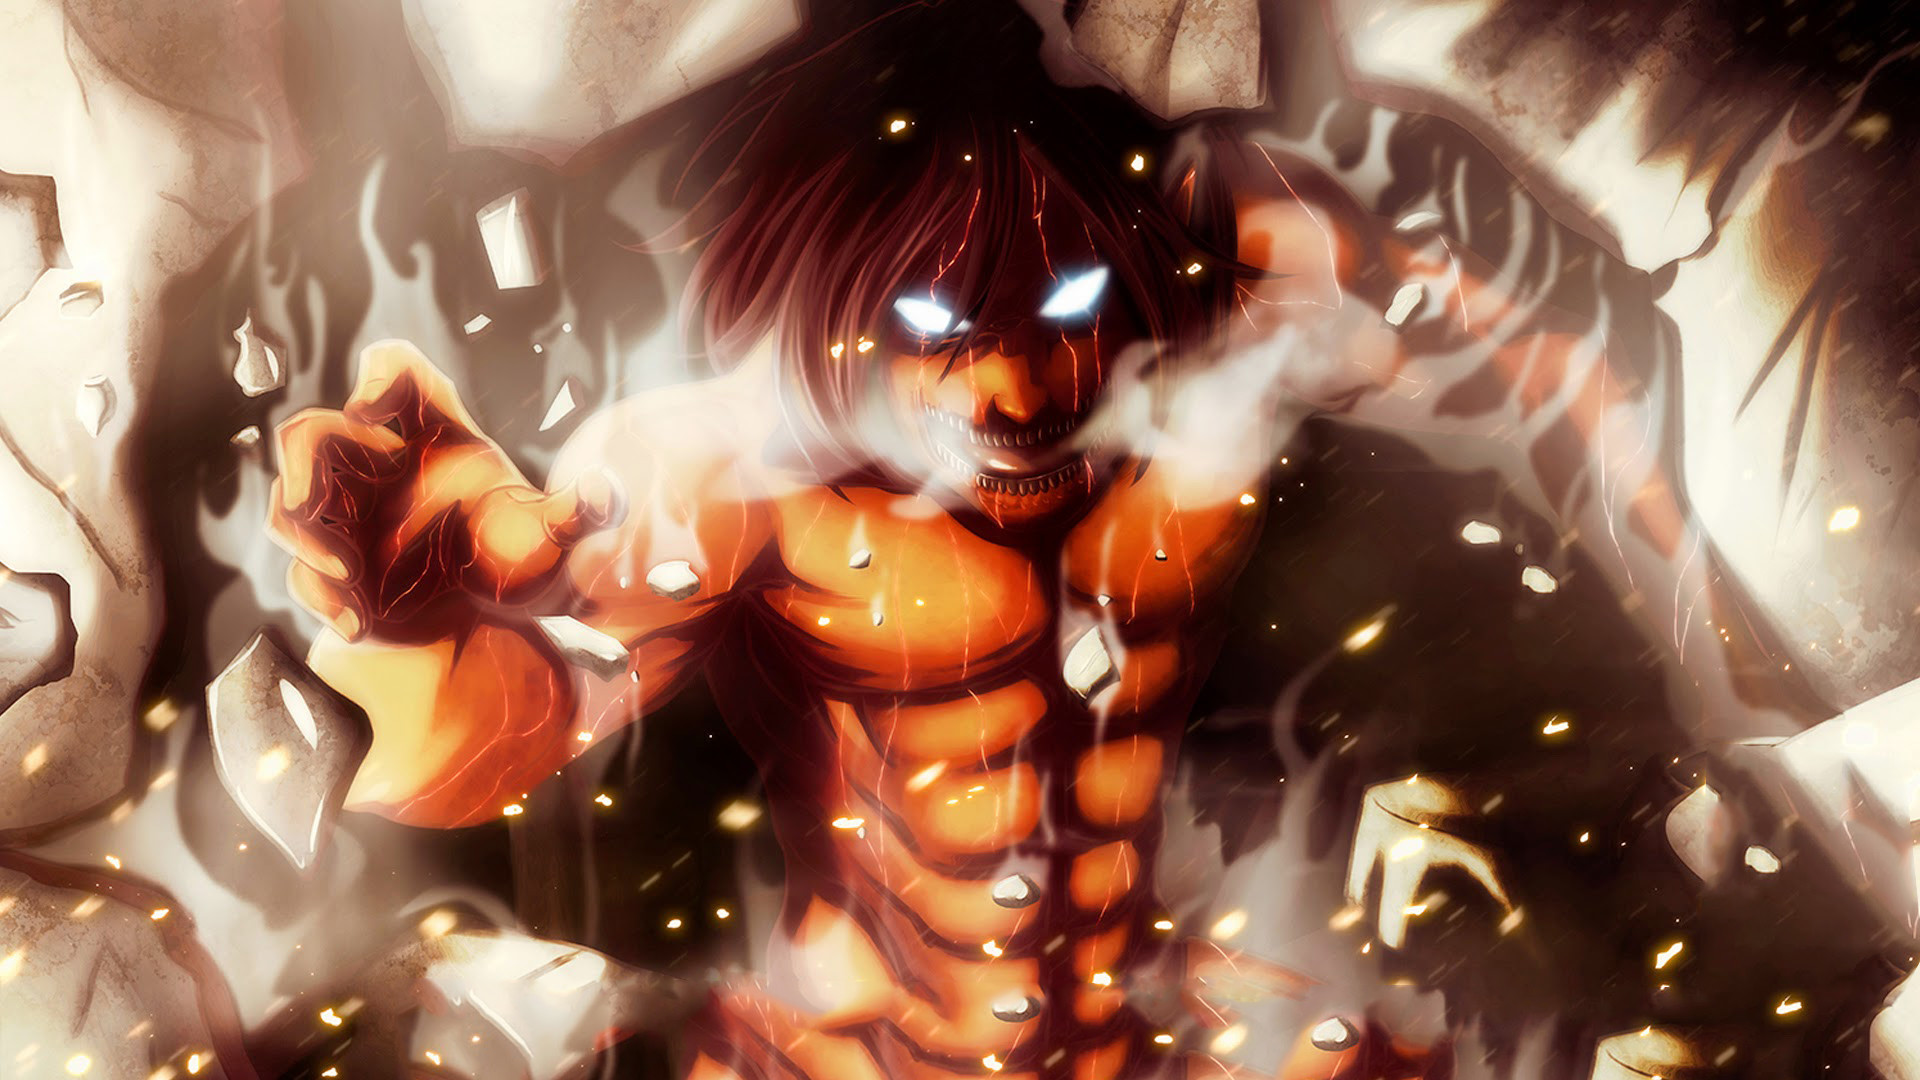 1920x1080 Attack On Titan Wallpaper Backgrounds Attack On Titan Wallpaper Free  Download